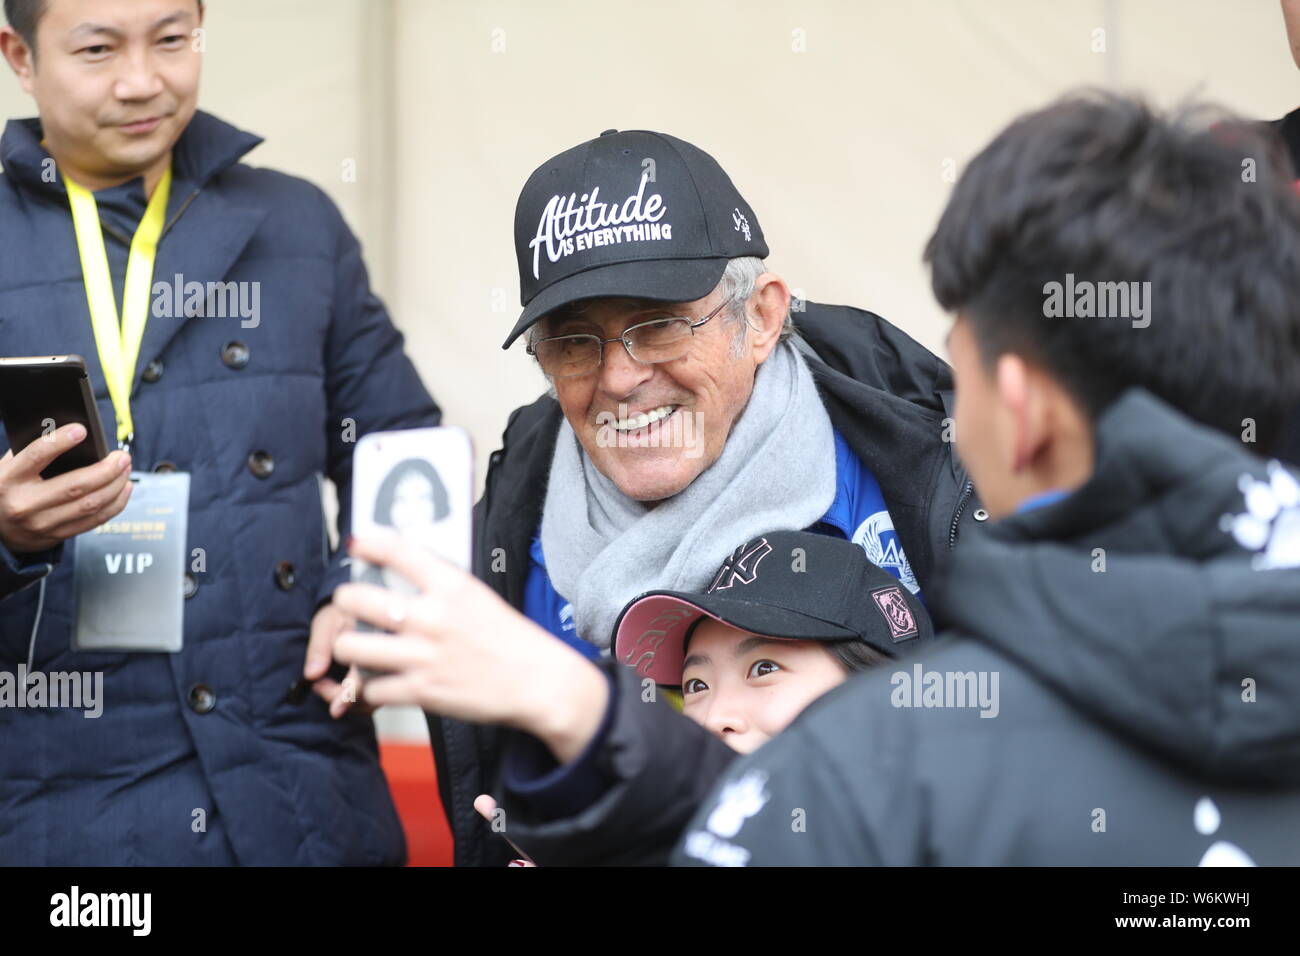 Serbian football coach and former player Bora Milutinovic, center, poses with fans for photos at a press conference of Sina 5v5 Football Golden League Stock Photo